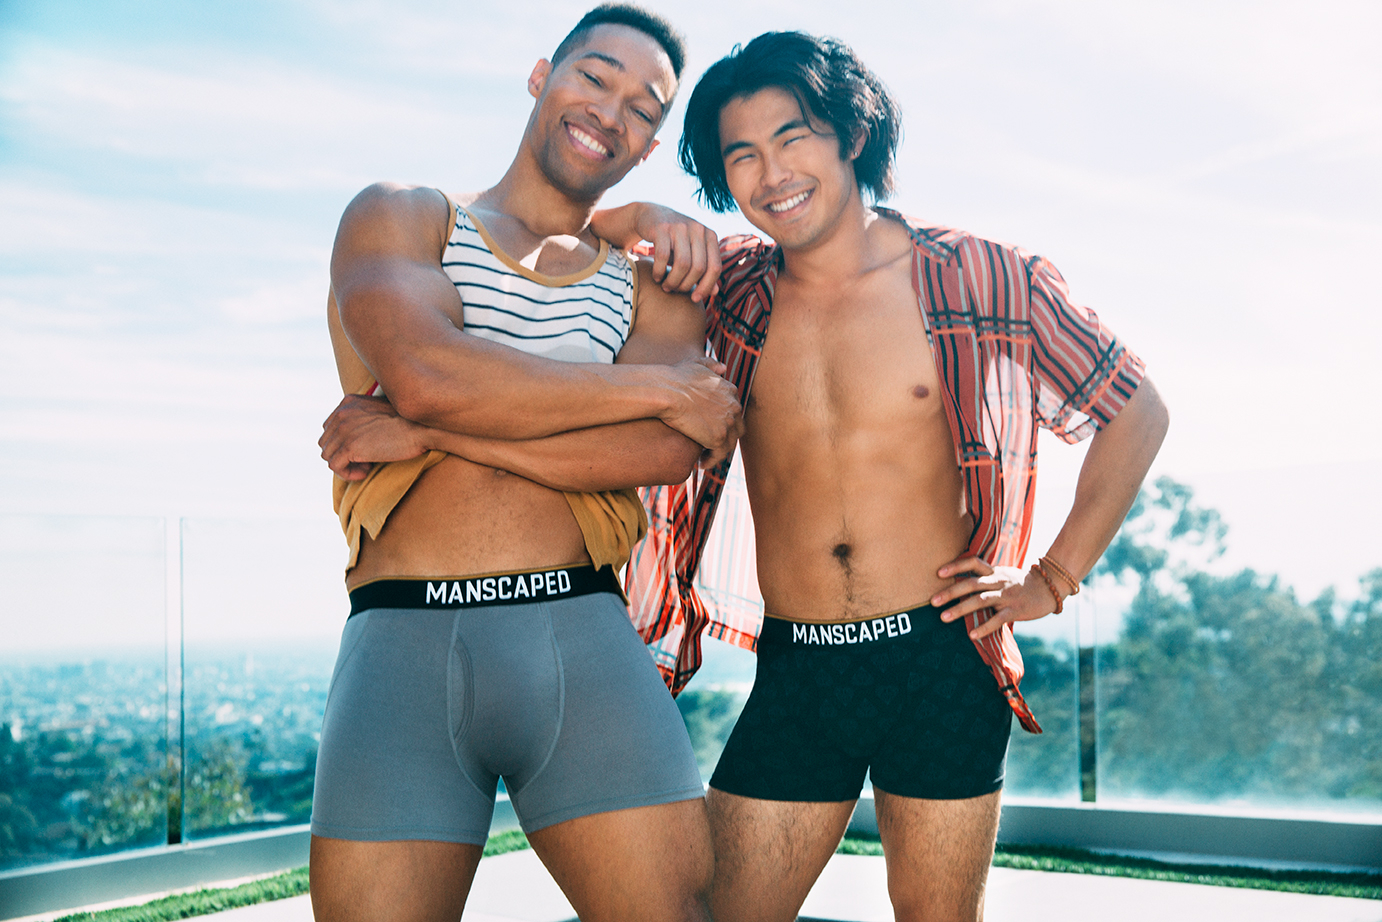 Testing the Manscaped Boxers 2.0: Is It Time to Upgrade?